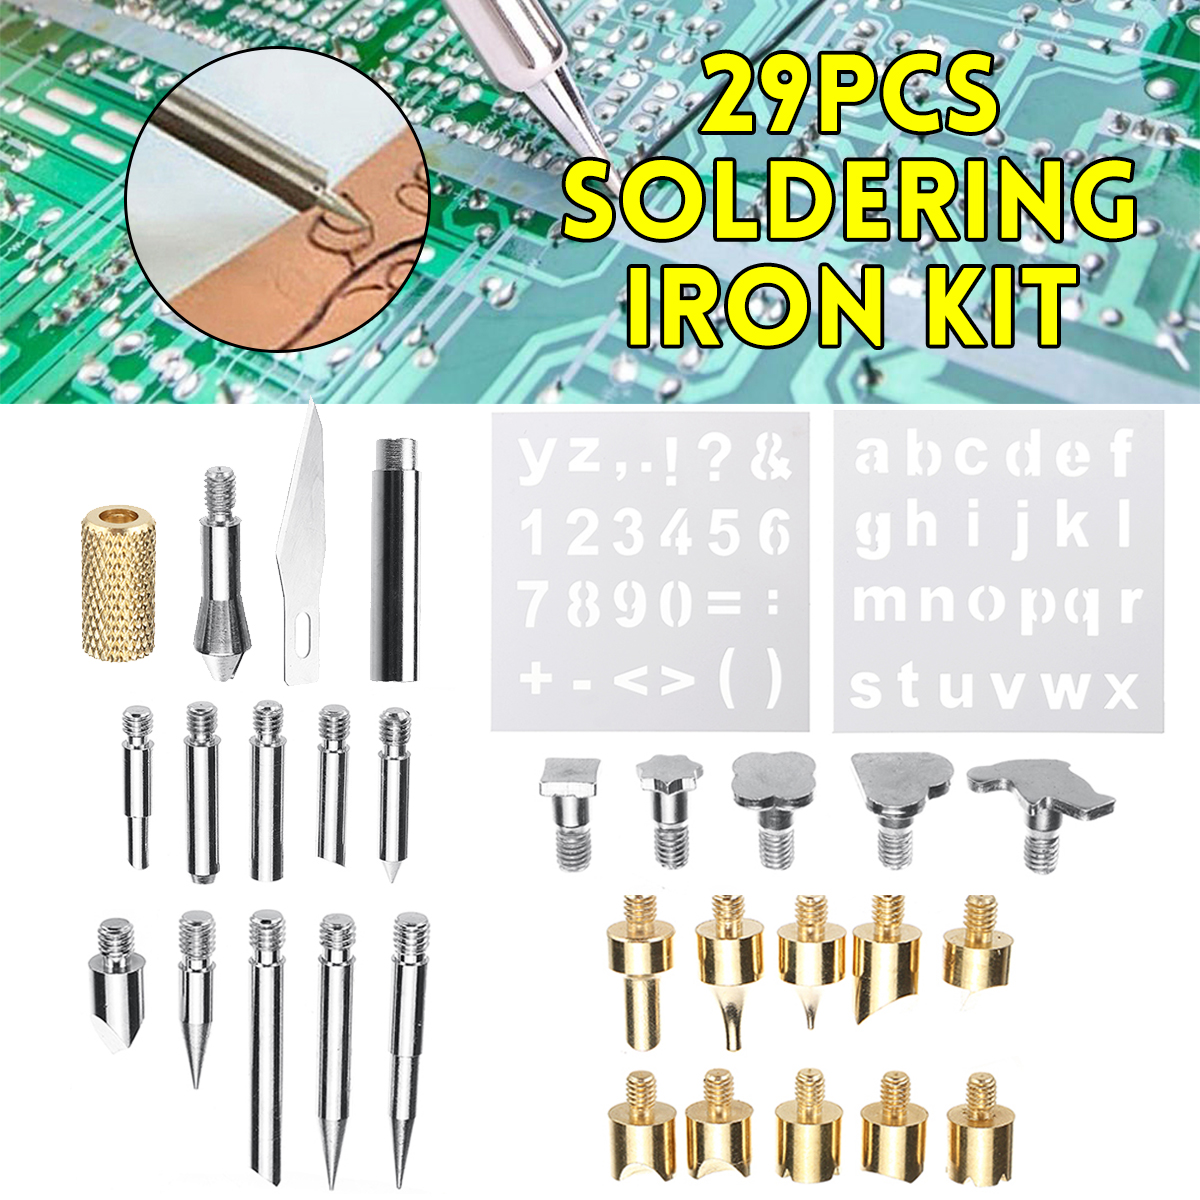 29Pcs-Soldering-Iron-Kit-With-Conversion-Head--Stencil-Copper-Steel-1689990-1